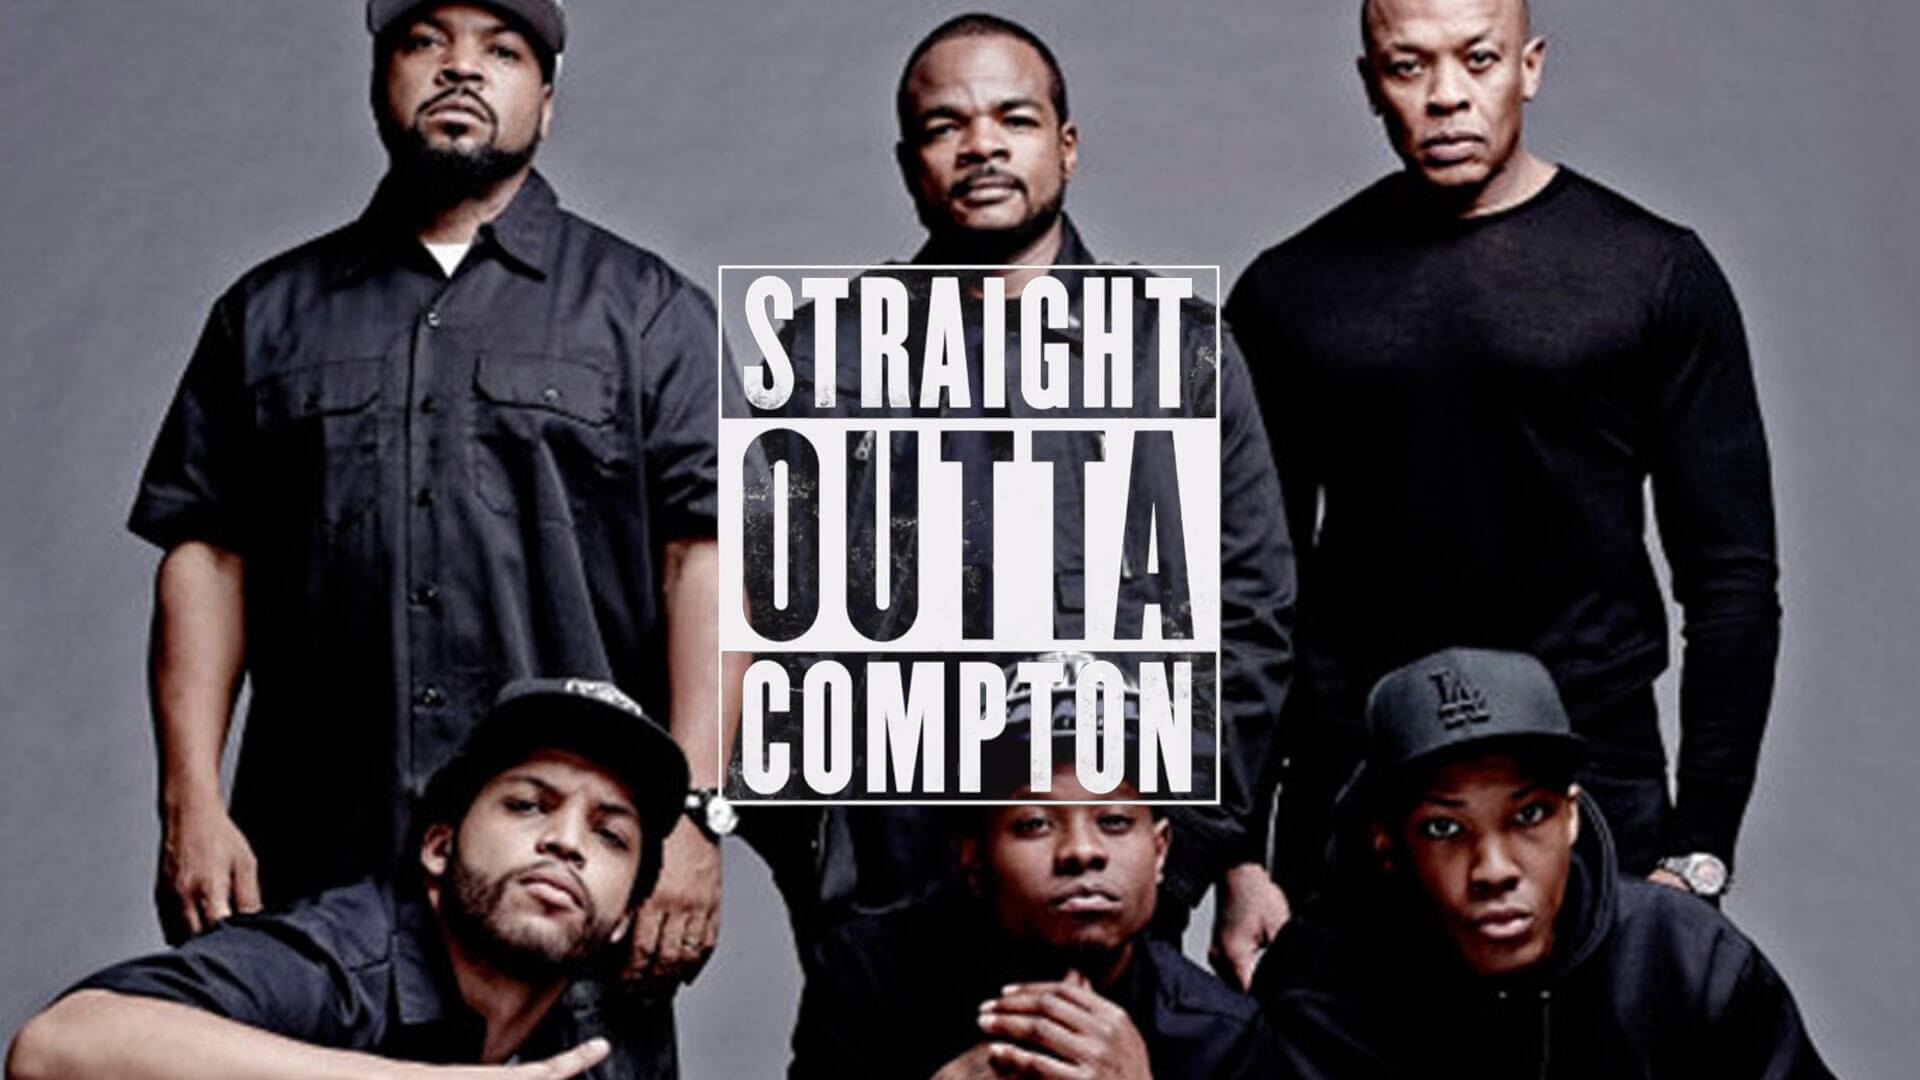 Straight-Outta-Compton-2015-Movie-Poster-Wallpapers.jpg